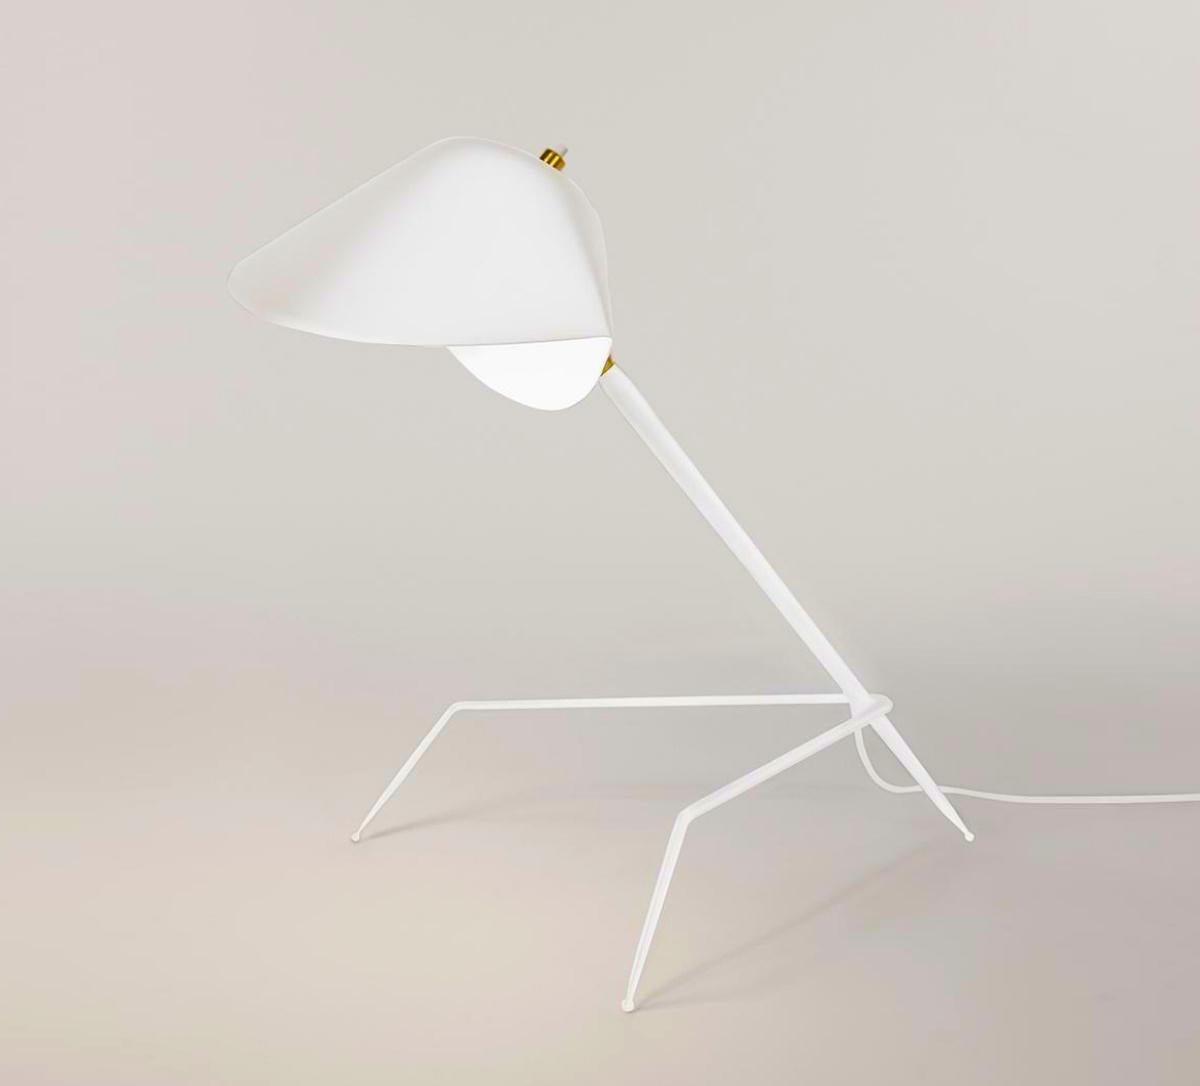 The shade of this lamp is modeled after a 